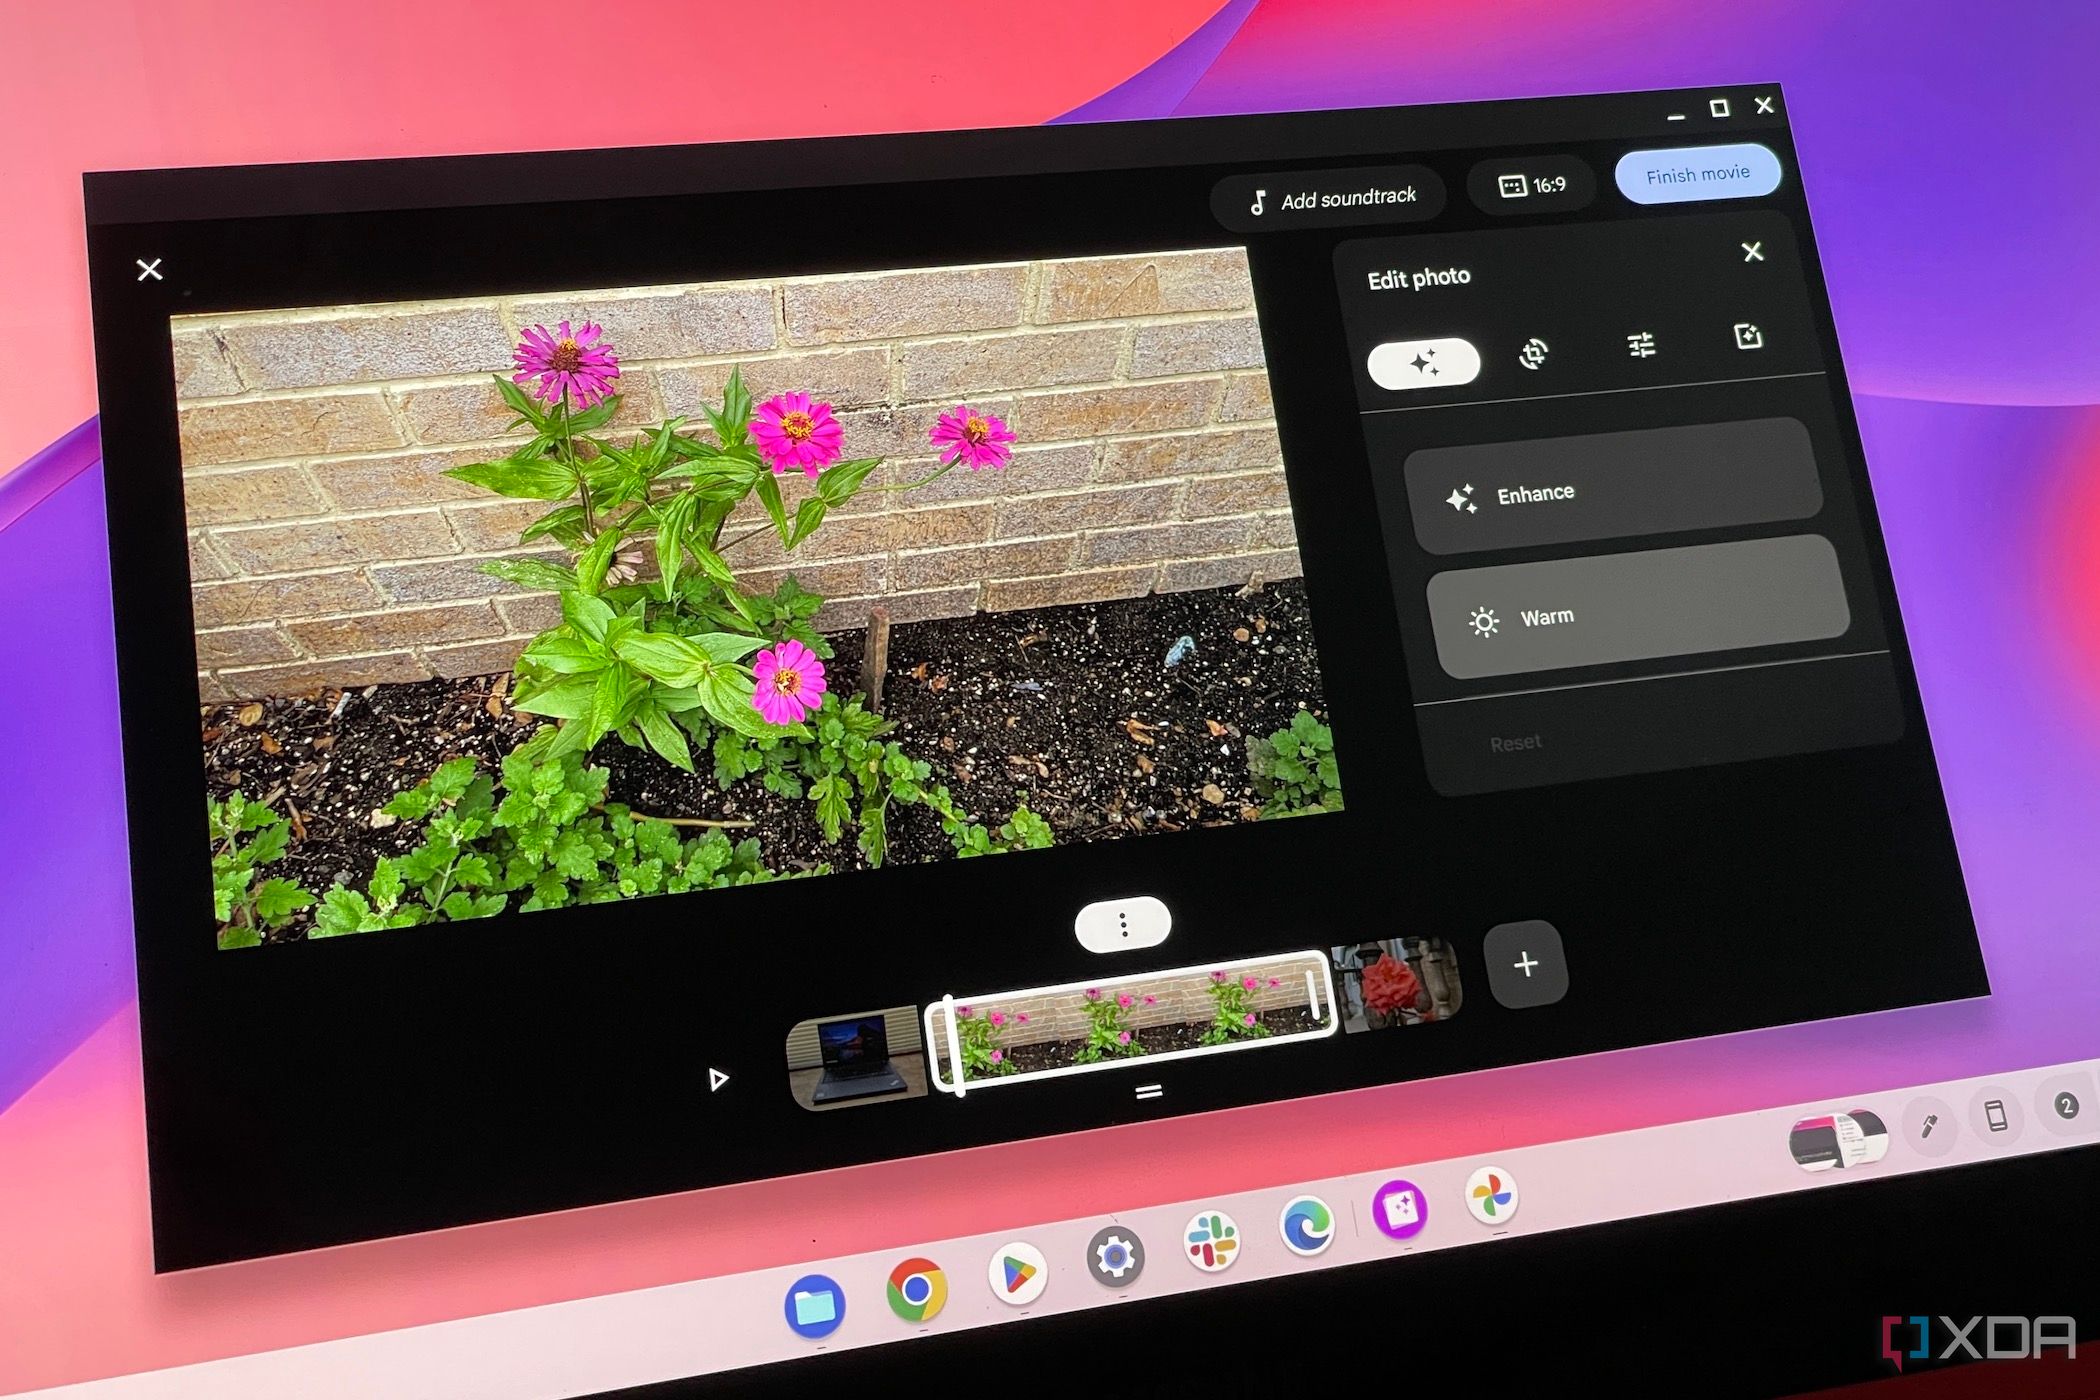 Google Photos video editing tools are now available to all Chromebook users